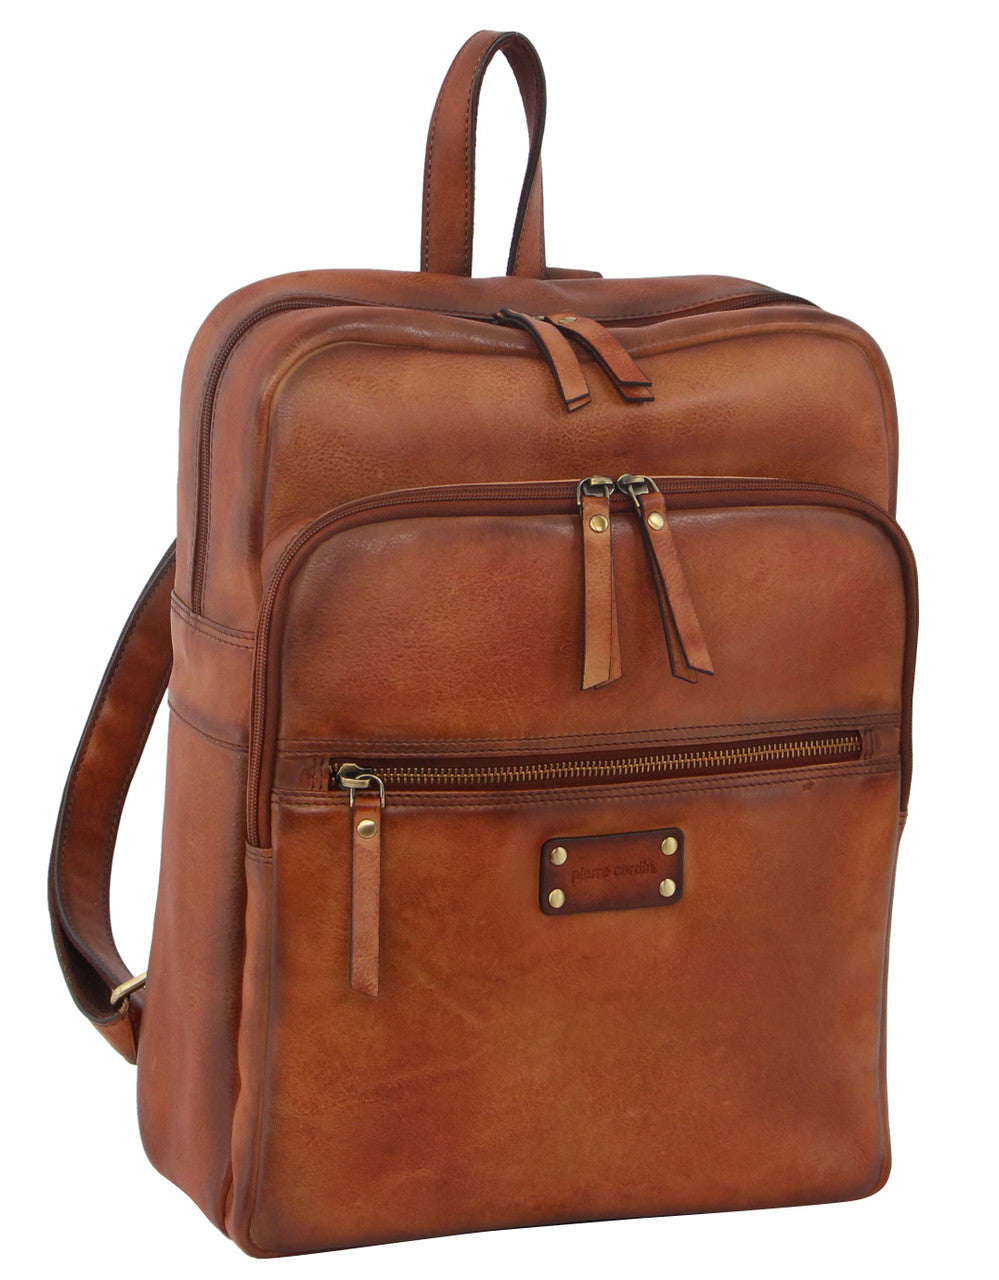 Pierre Cardin Burnished Leather Multi-Compartment Laptop Backpack PC3332 Cog